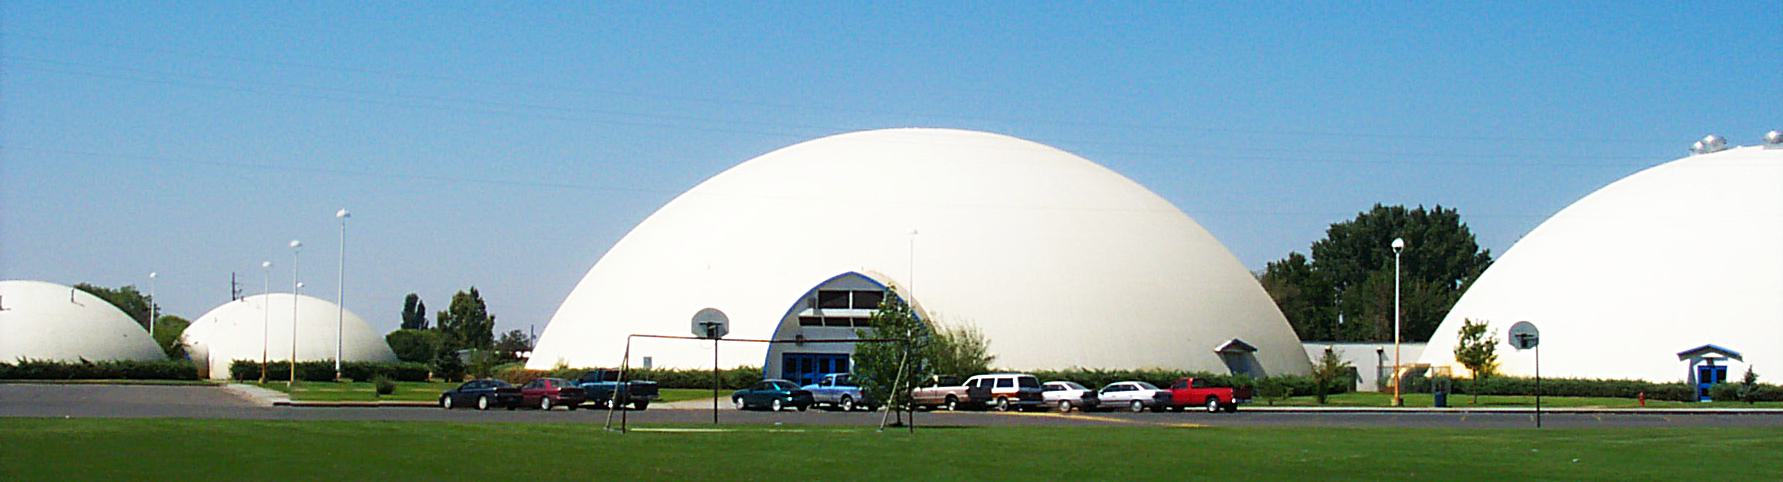 Monolithic built the first Monolithic Dome high school in Emmett California in 1986.